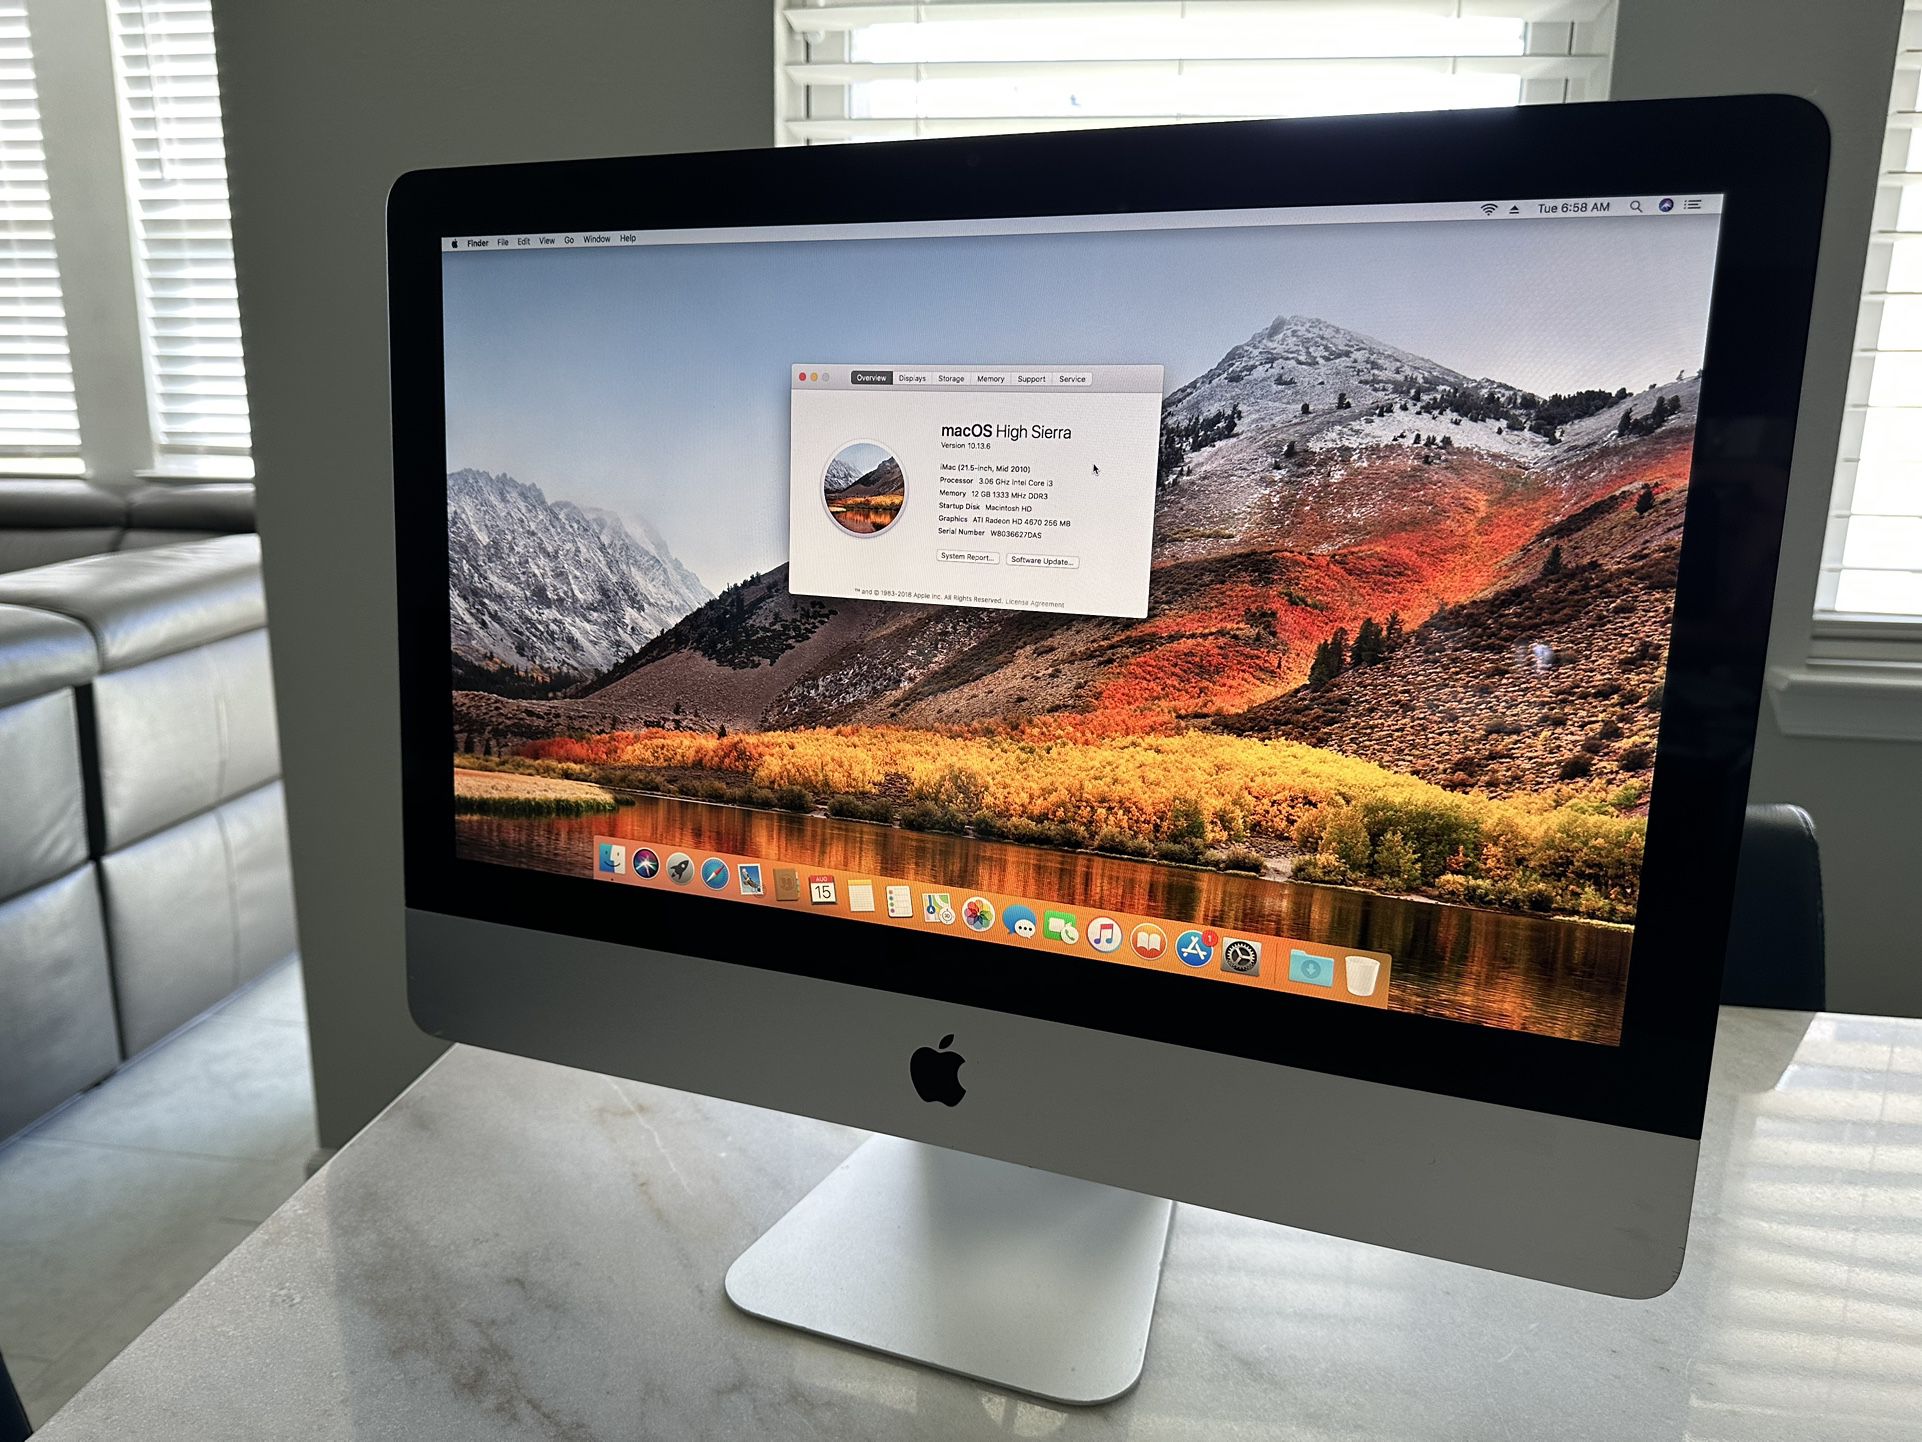 Apple iMac 21.5-inch 3.06 GHz Quad-Core Intel Core i3 (Mid 2010) for Sale  in Windermere, FL - OfferUp